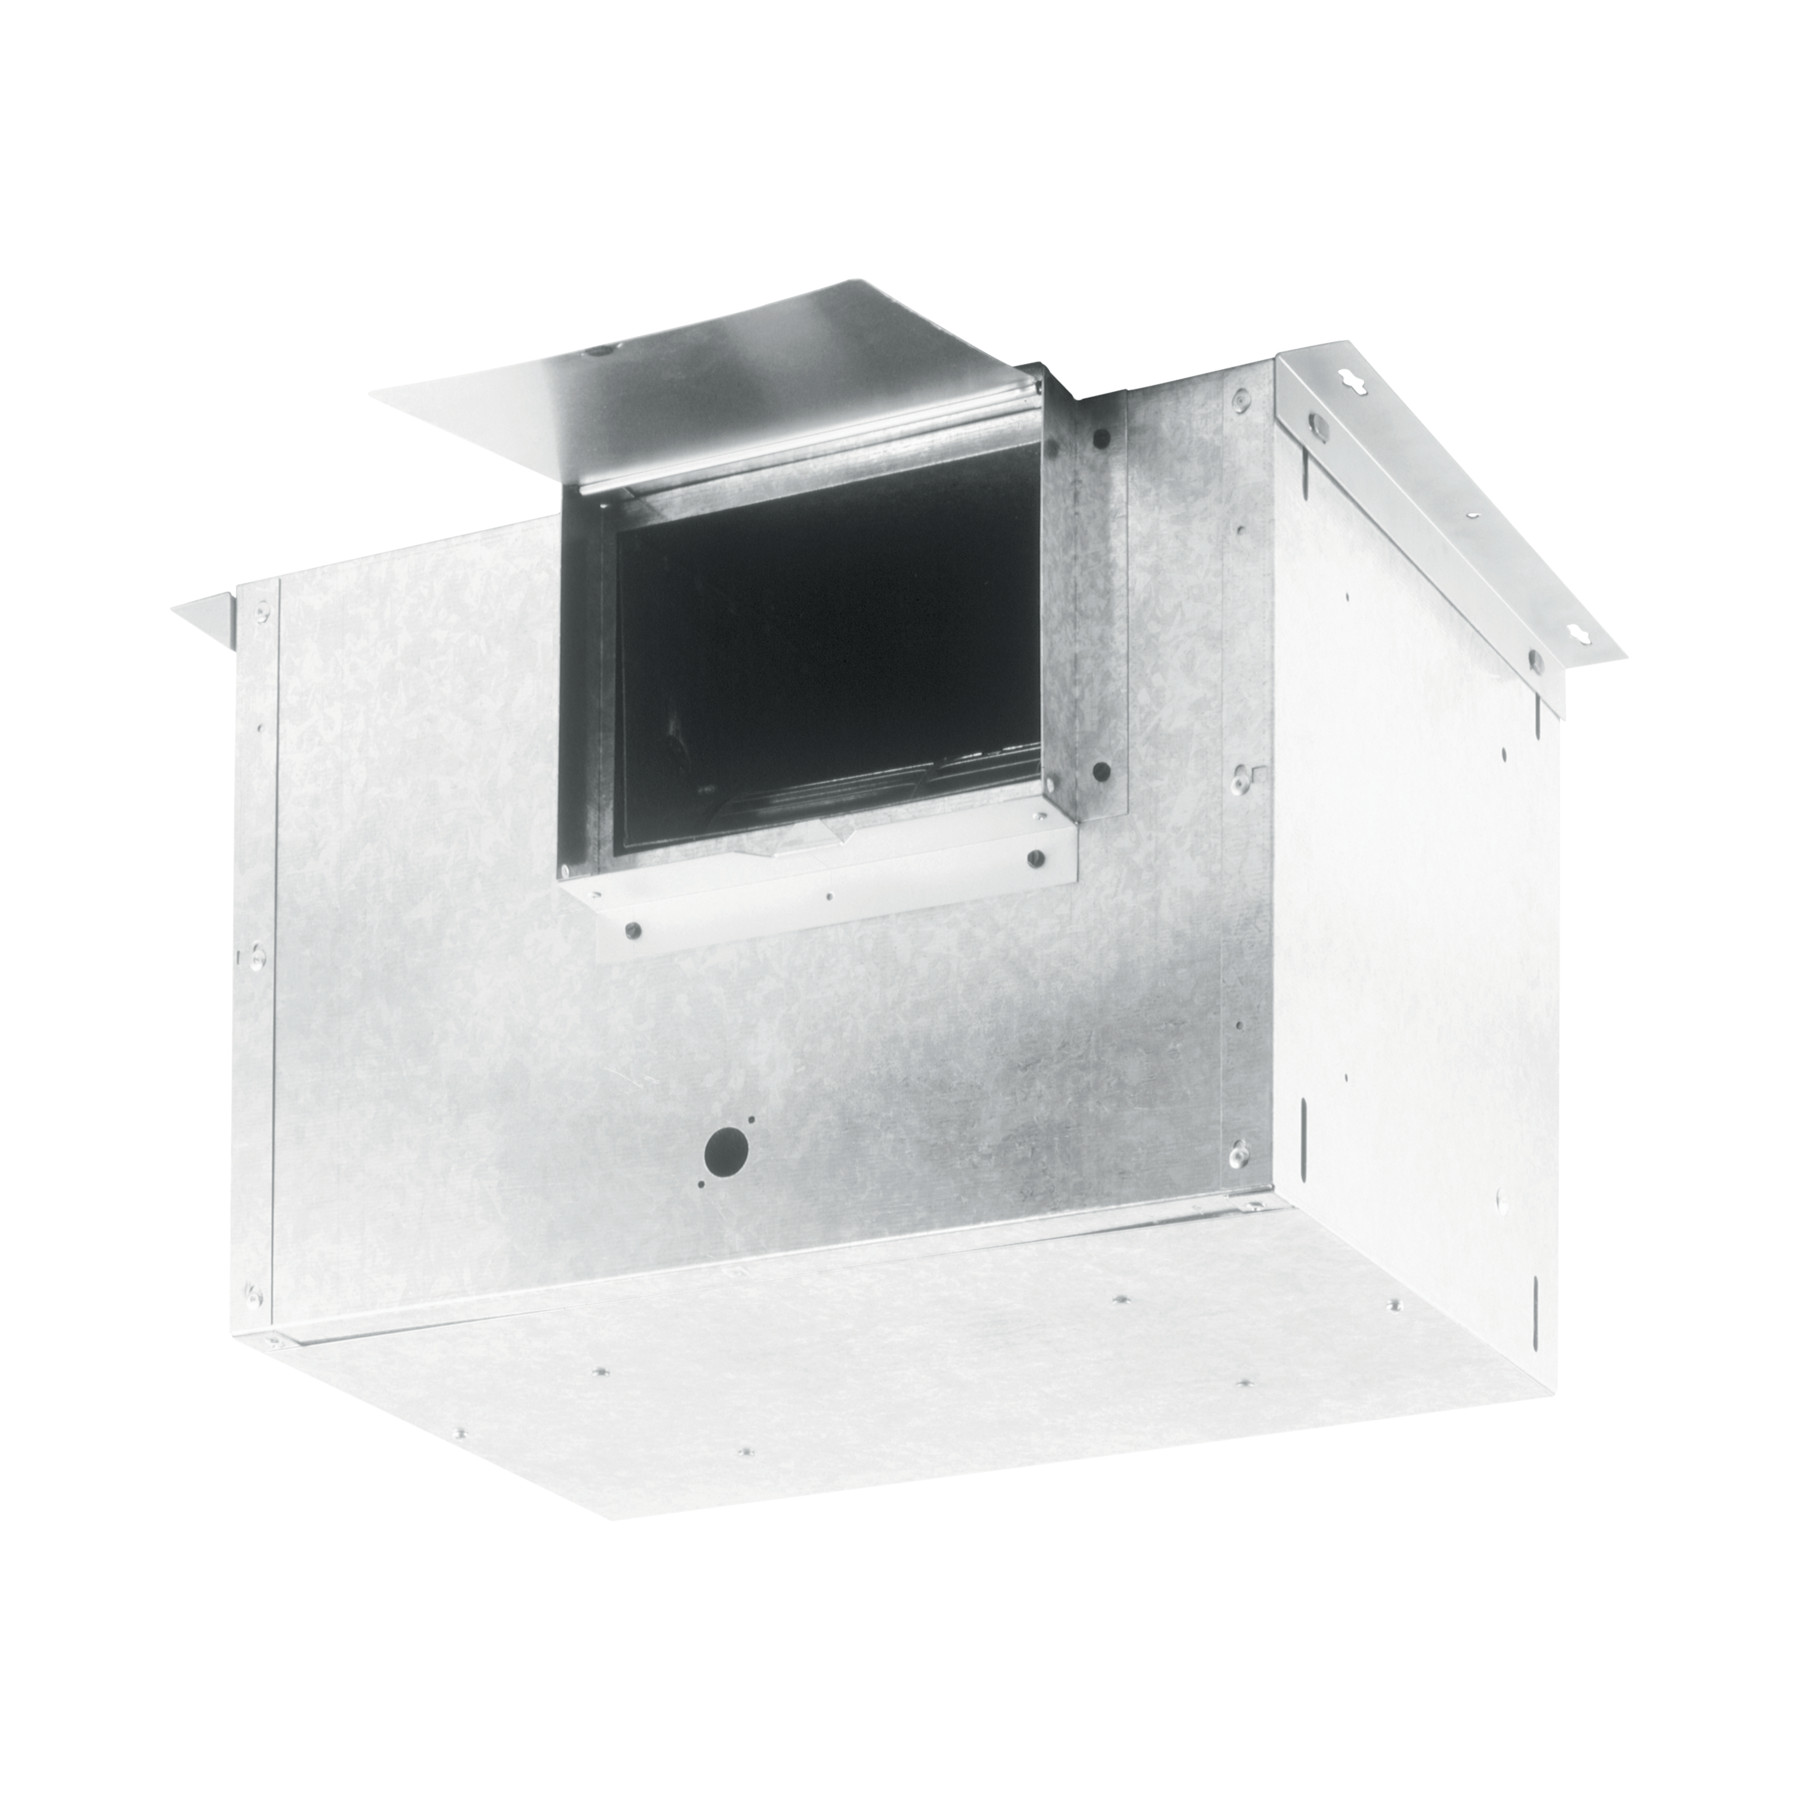 **DISCONTINUED** Broan® LOSONE SELECT™ Ventilation Fan; 1214 CFM Straight Through, 6.7 Sones; 1076 CFM Right Angle